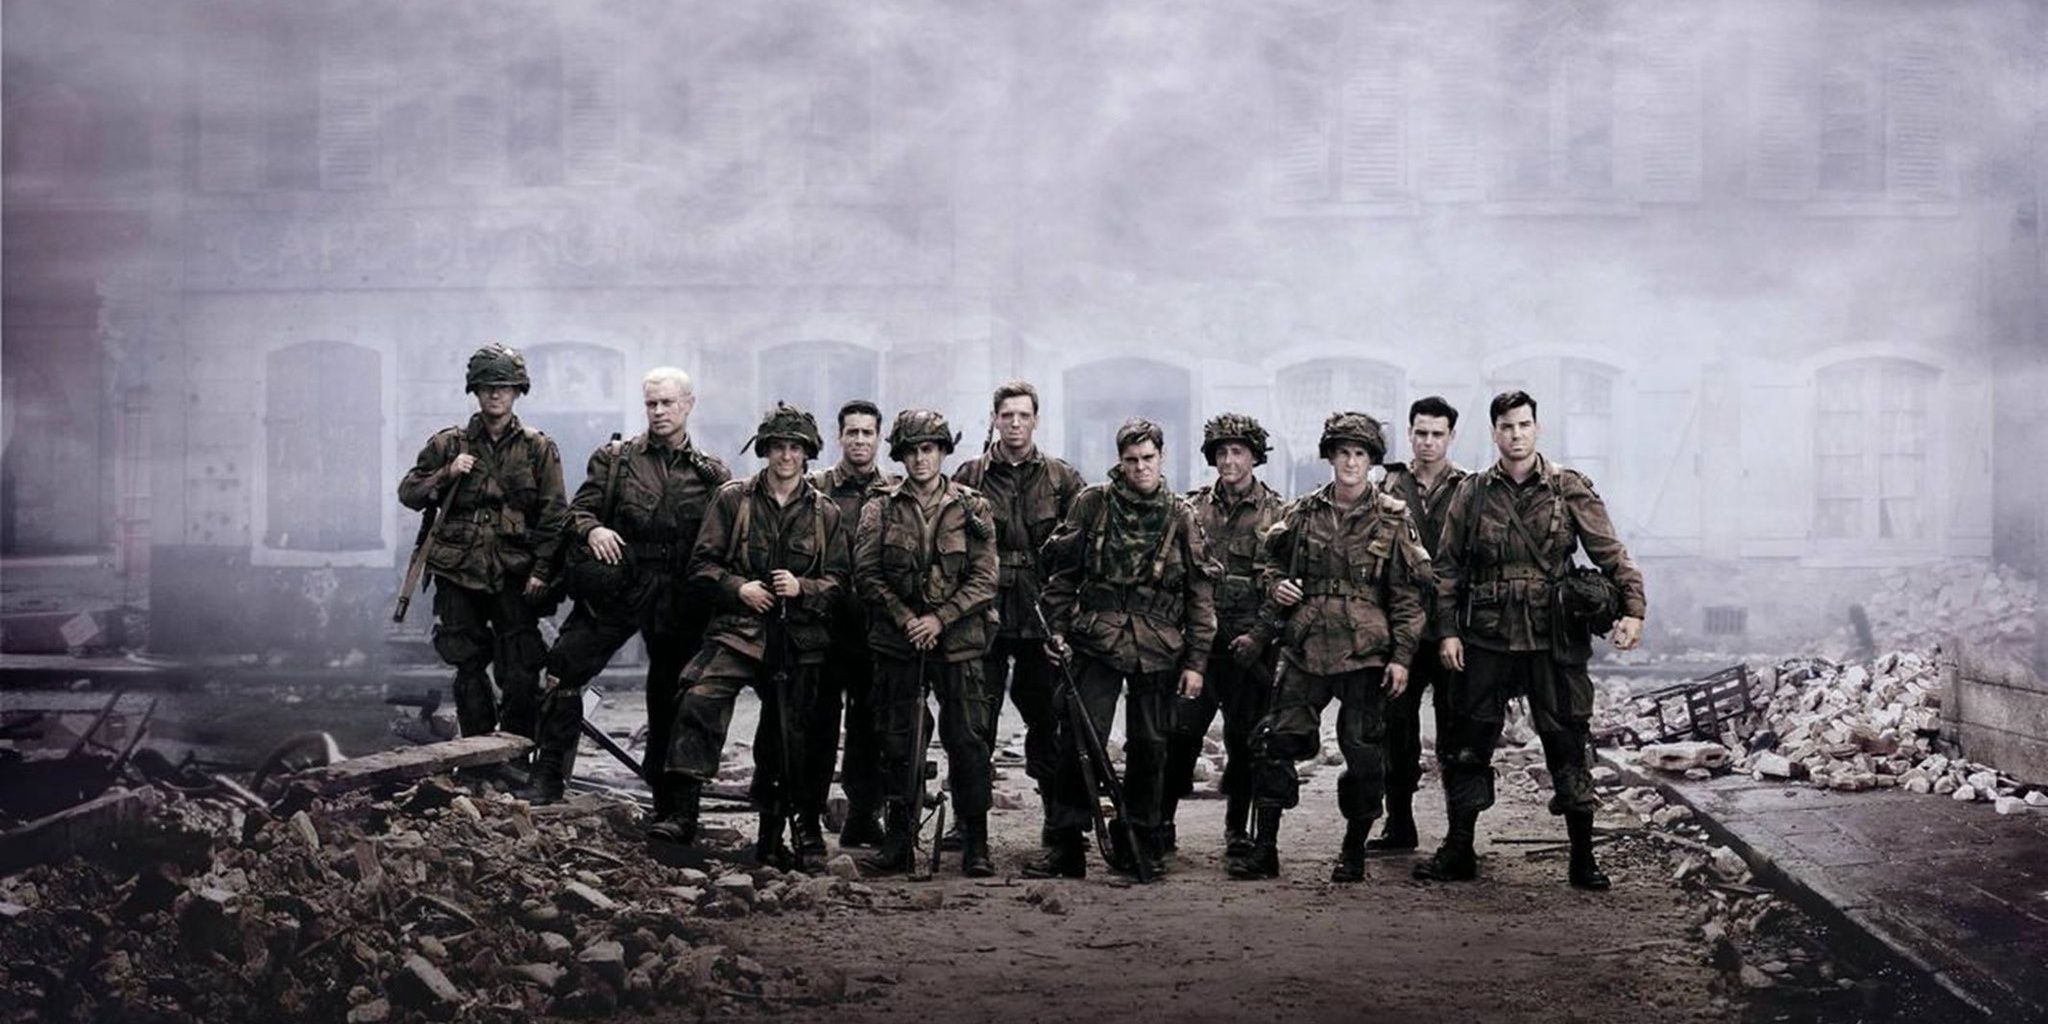 Soldiers in Band of Brothers